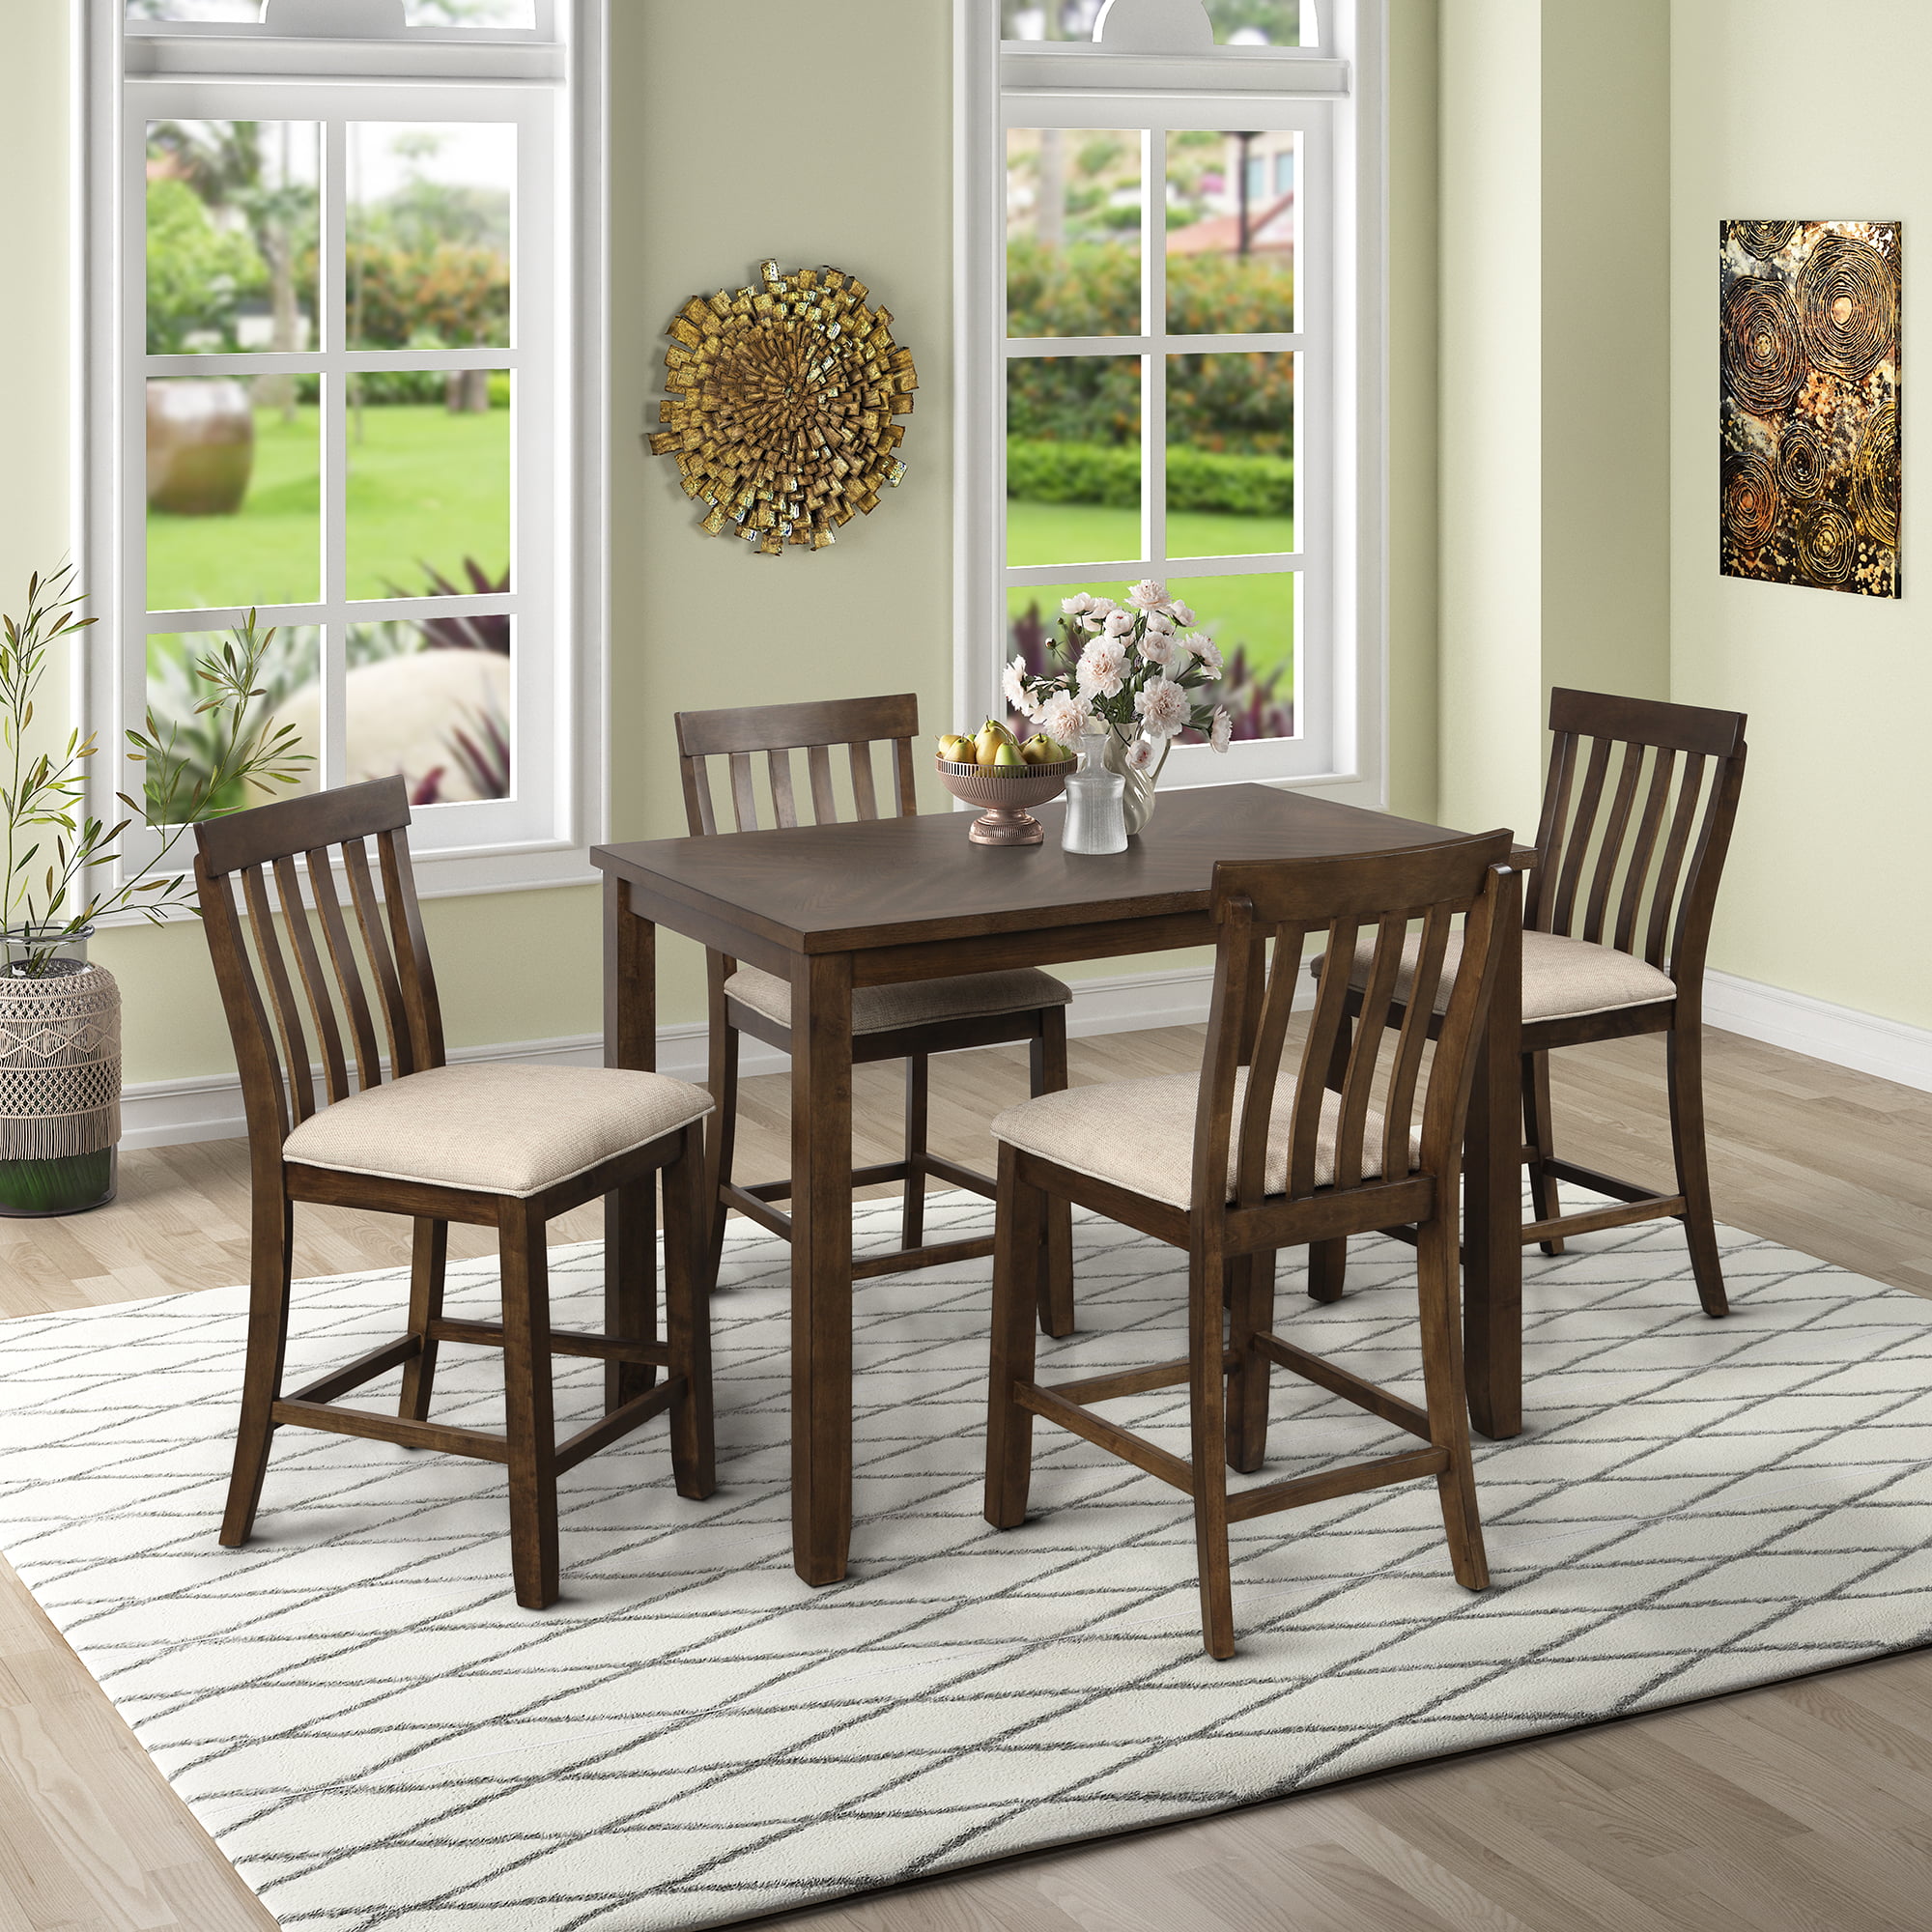 Btmway Wood Kitchen Dining Room Table, Kitchen And Dining Room Set